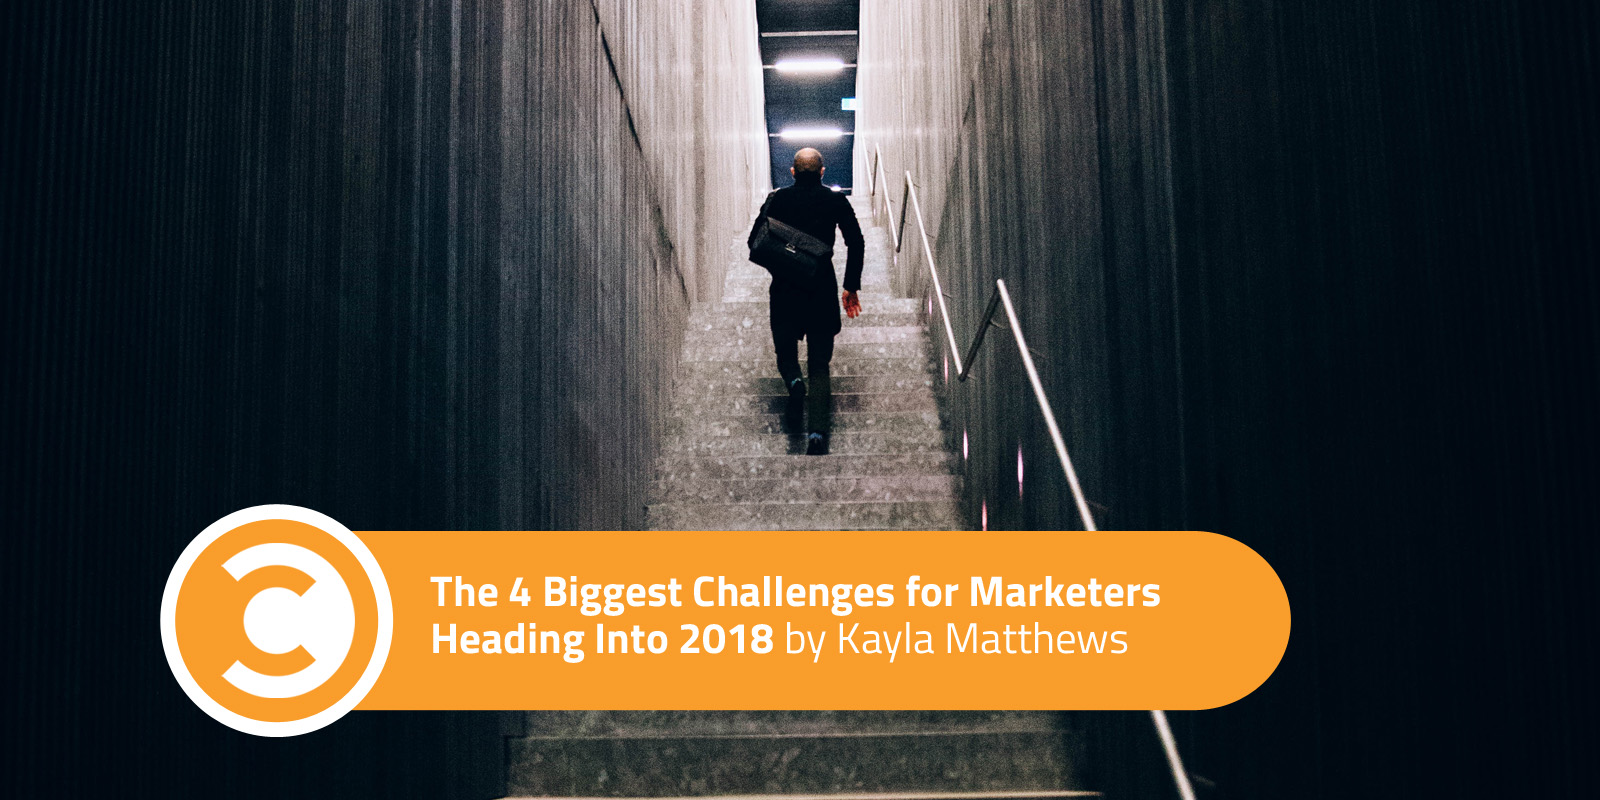 The 4 Biggest Challenges for Marketers Heading Into 2018